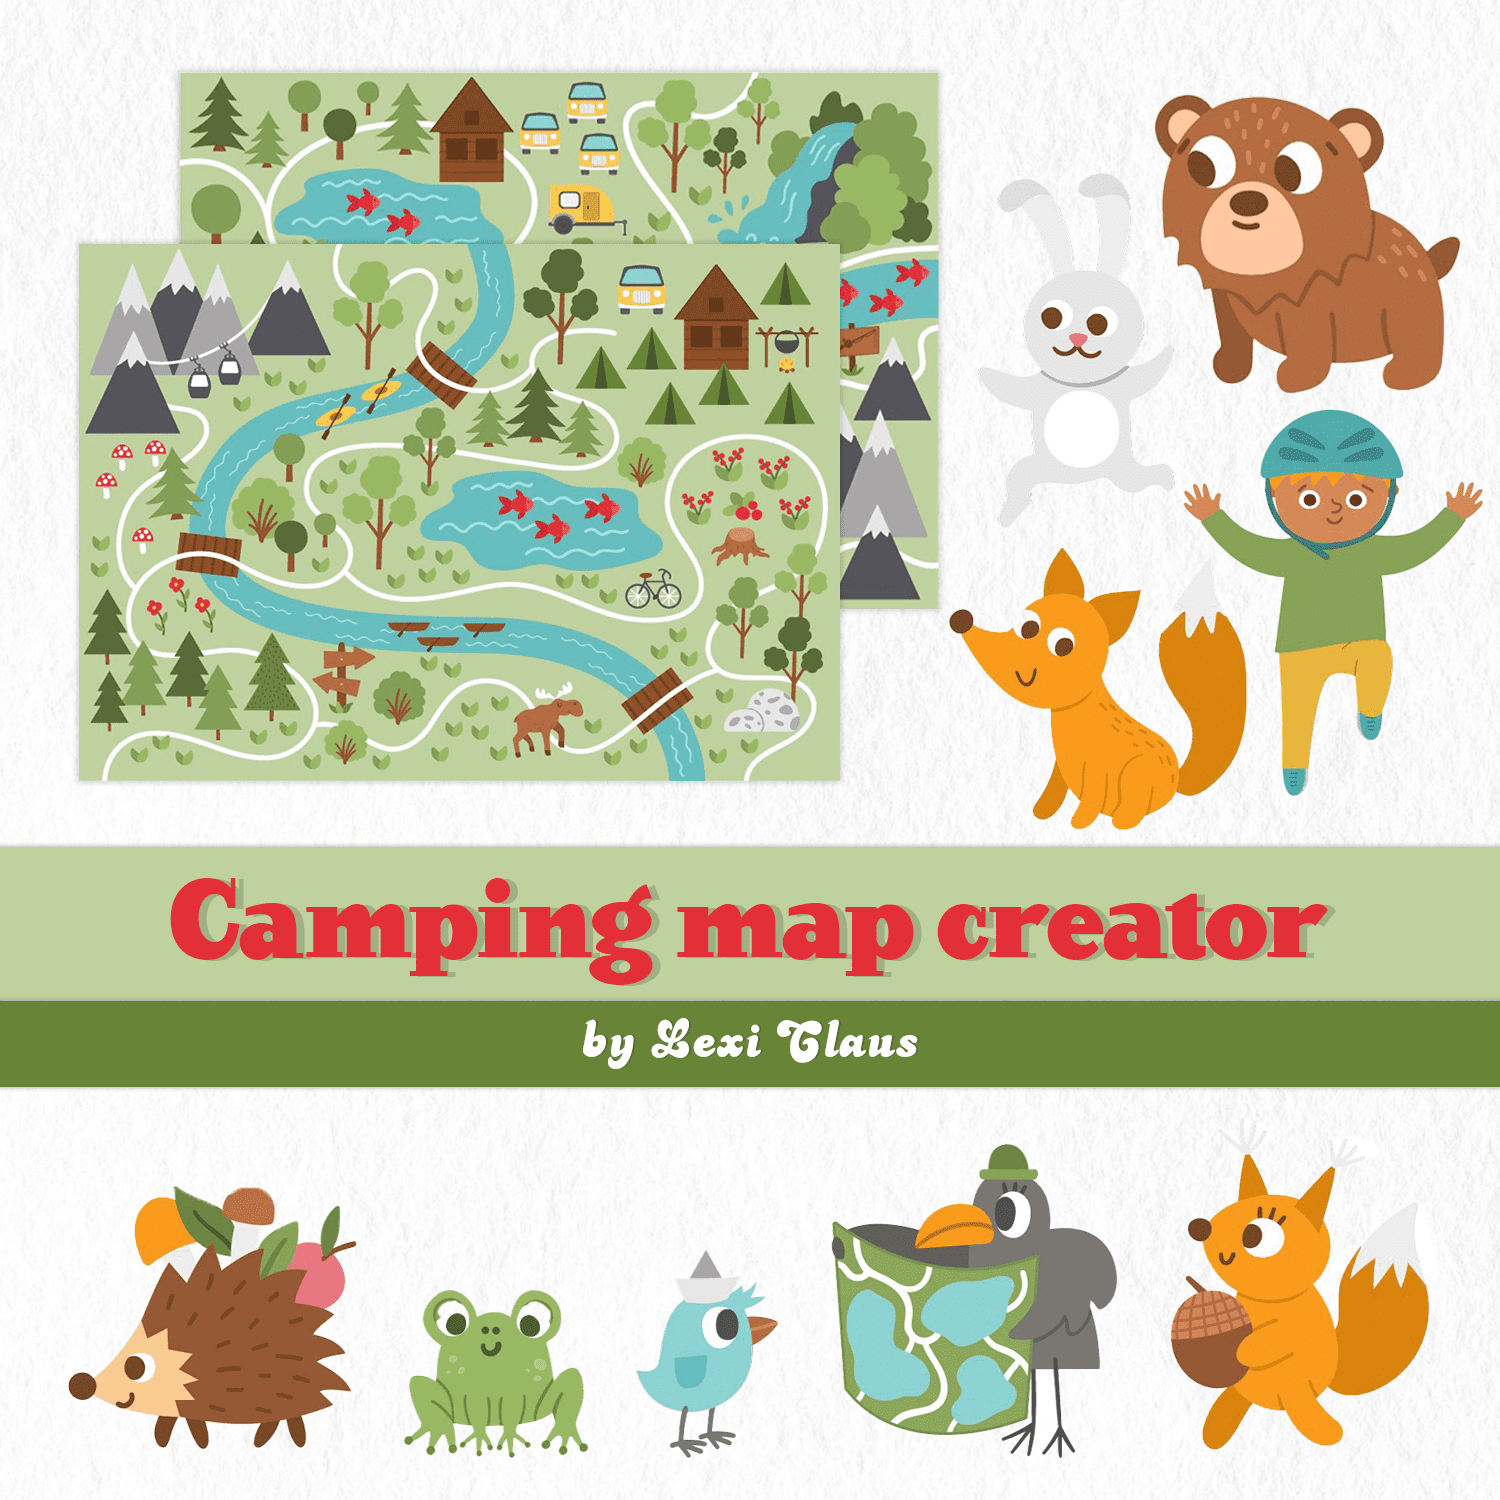 Camping map creator cover.